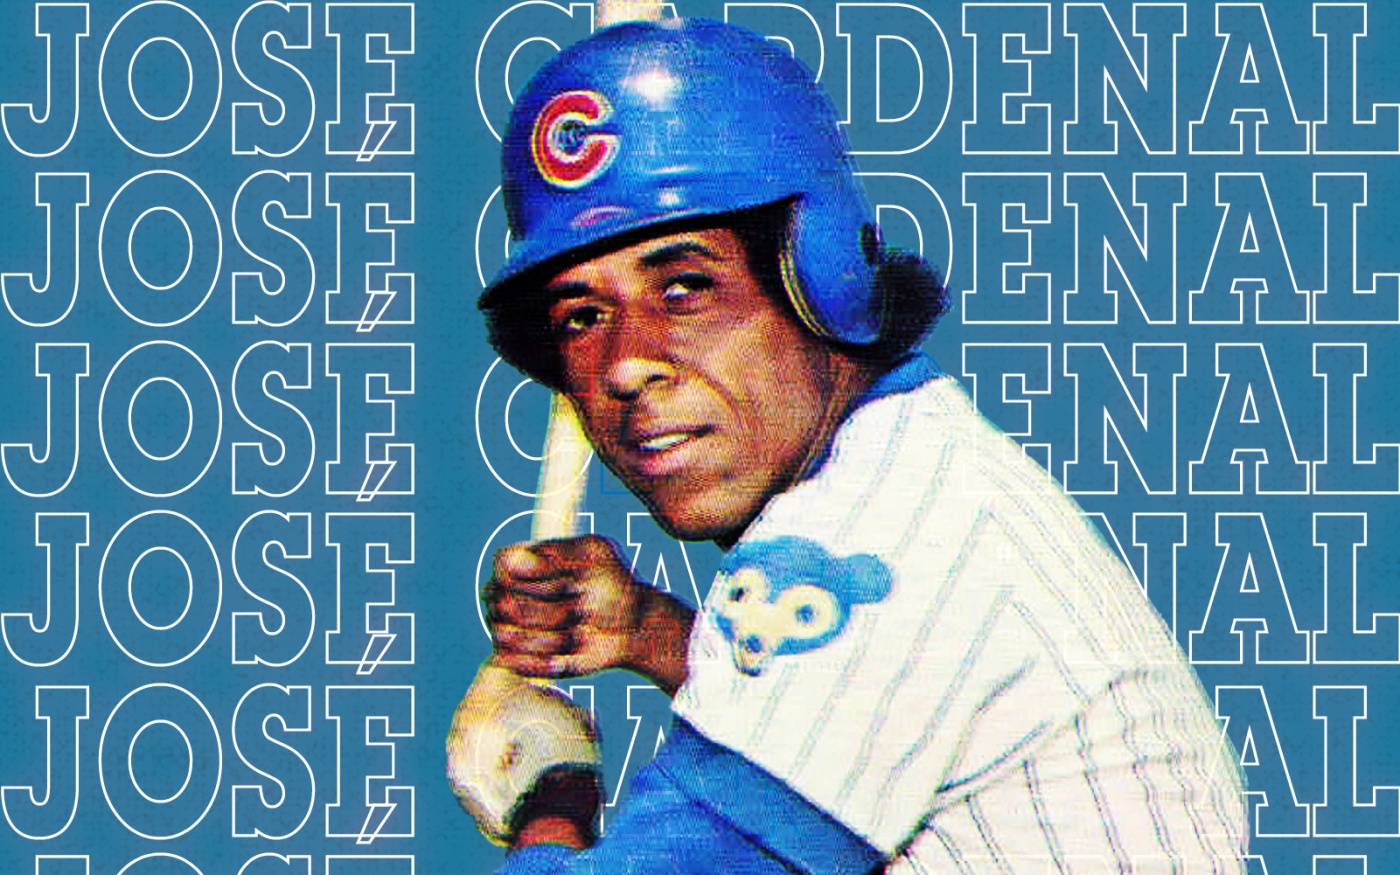 José Cardenal Chicago Cubs  Chicago cubs, Chicago cubs history